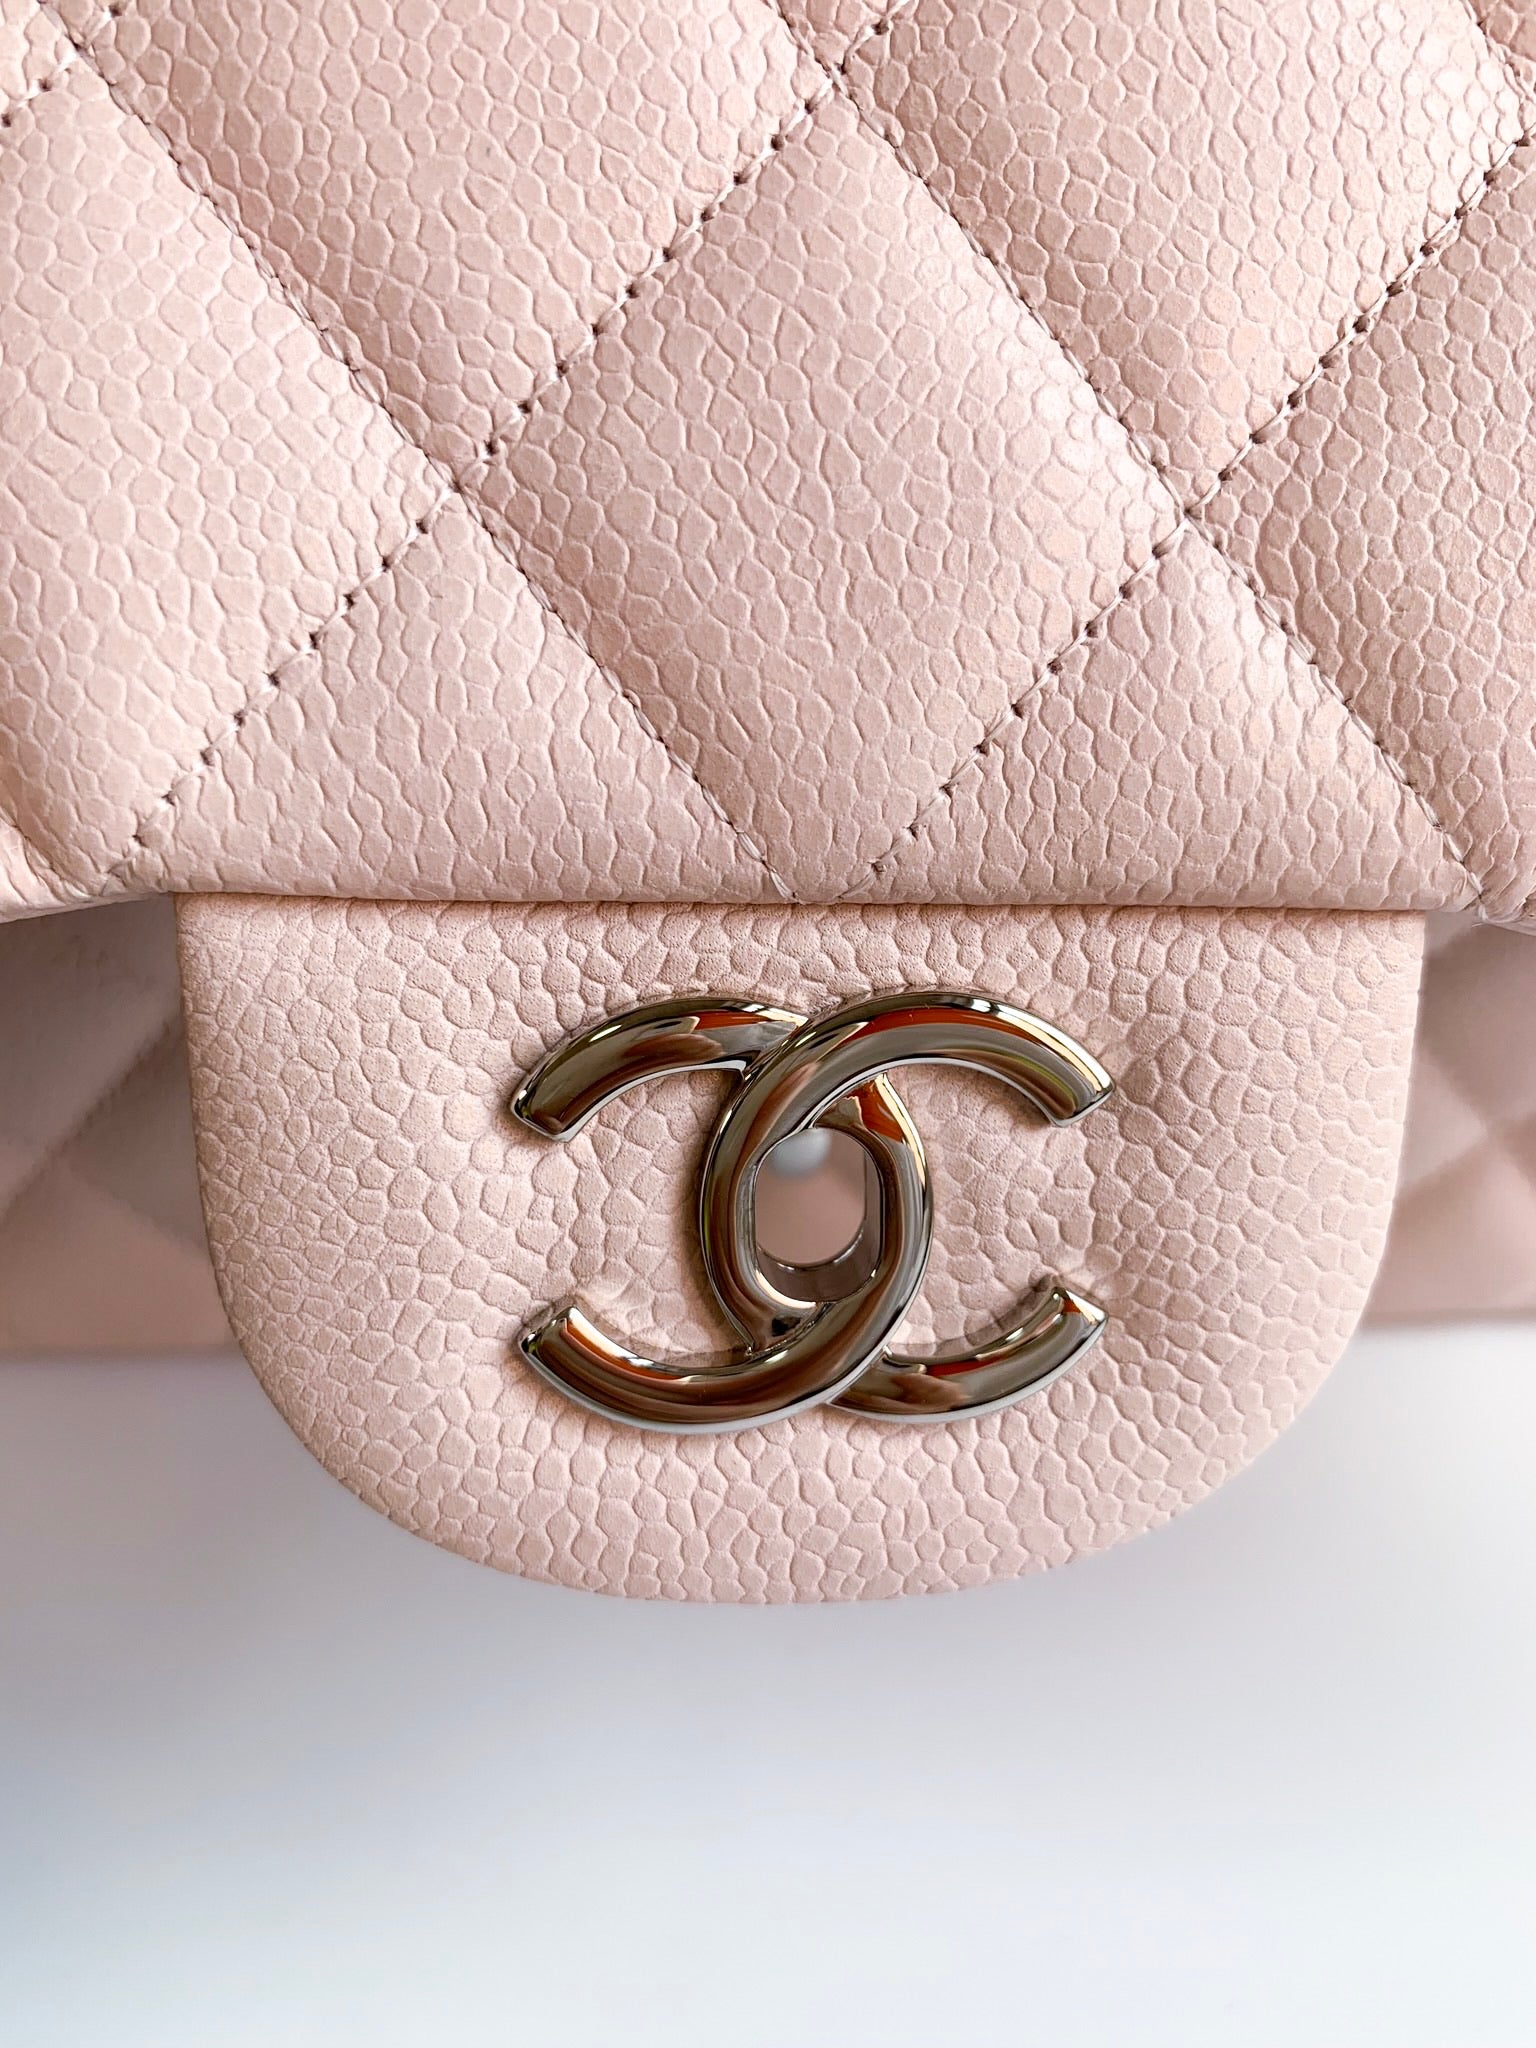 CHANEL 22B COLLECTION PREVIEW & COLOR CODES  PEARL CRUSH BAG & DENIM BAG  ARE BACK 